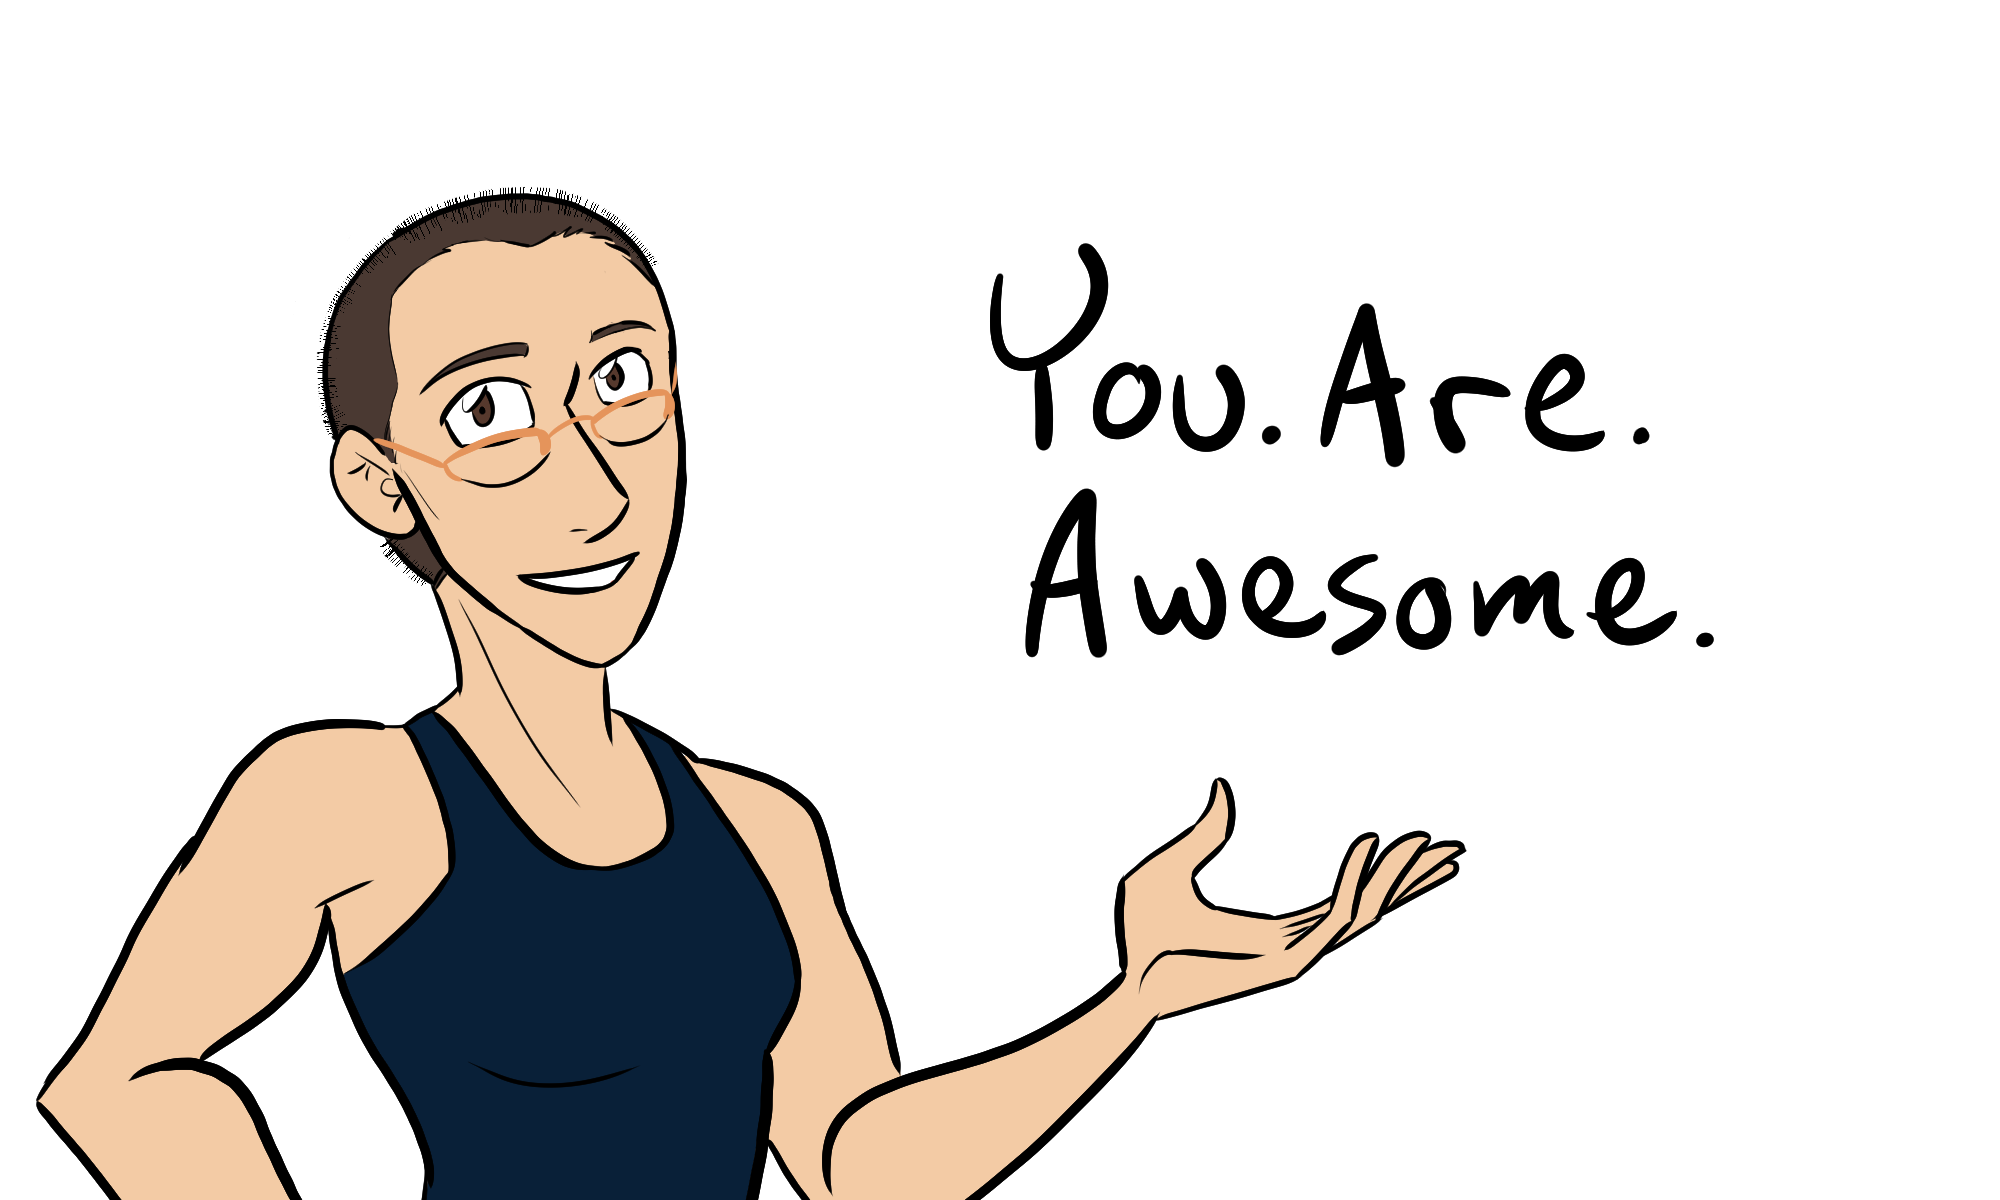 you are awesome, featuring a selfie of the artist and the catchphrase